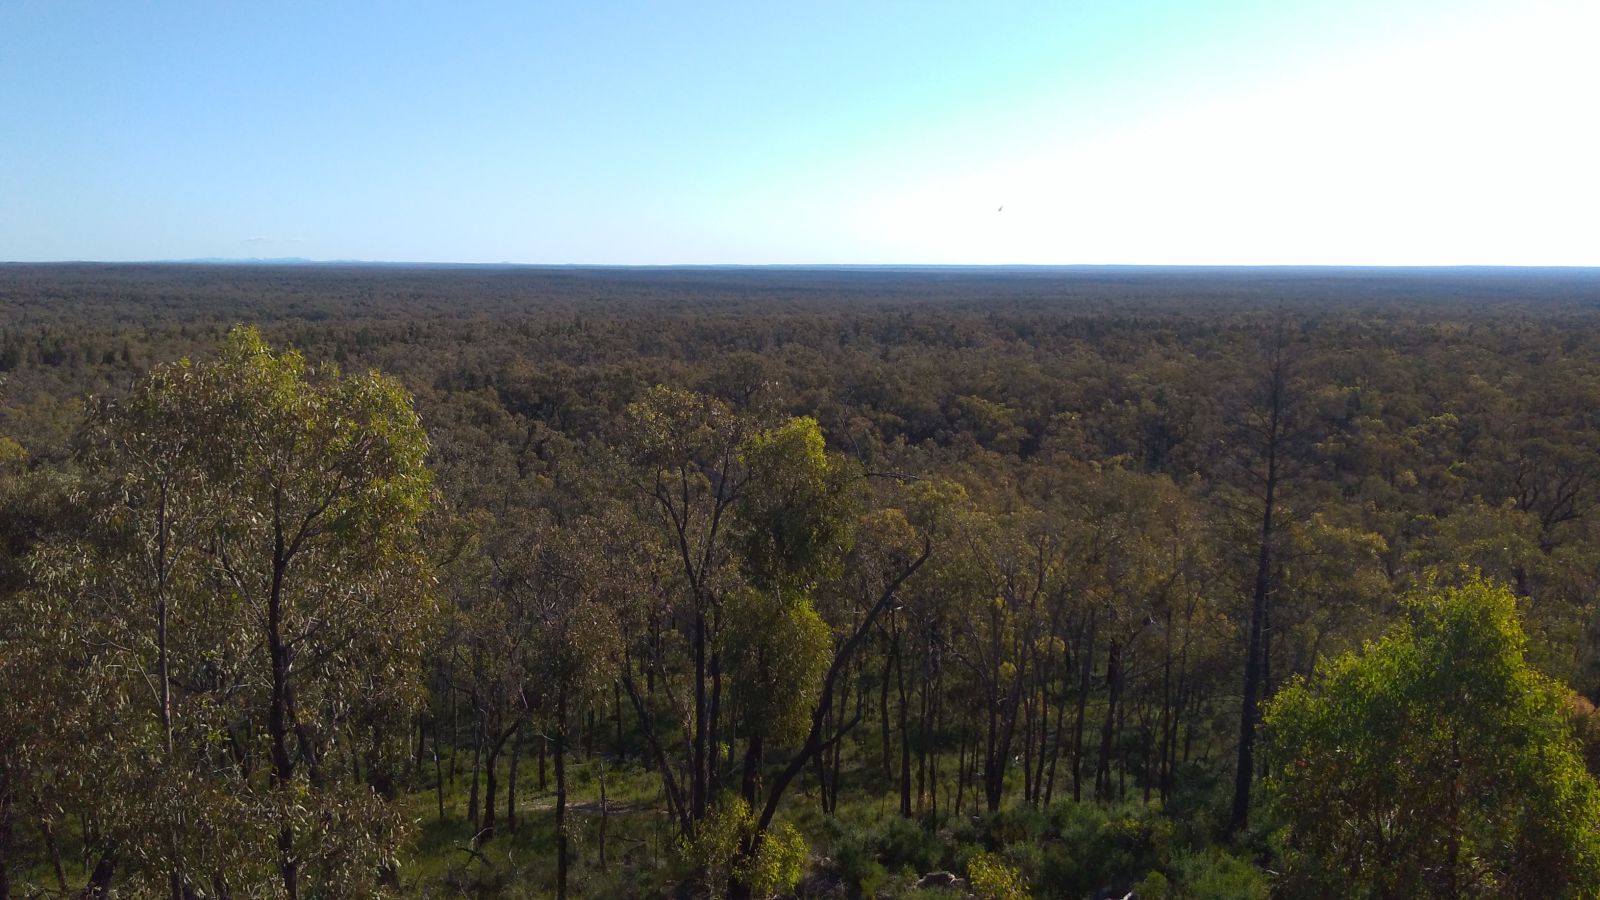 Behold, the Pilliga Forest...